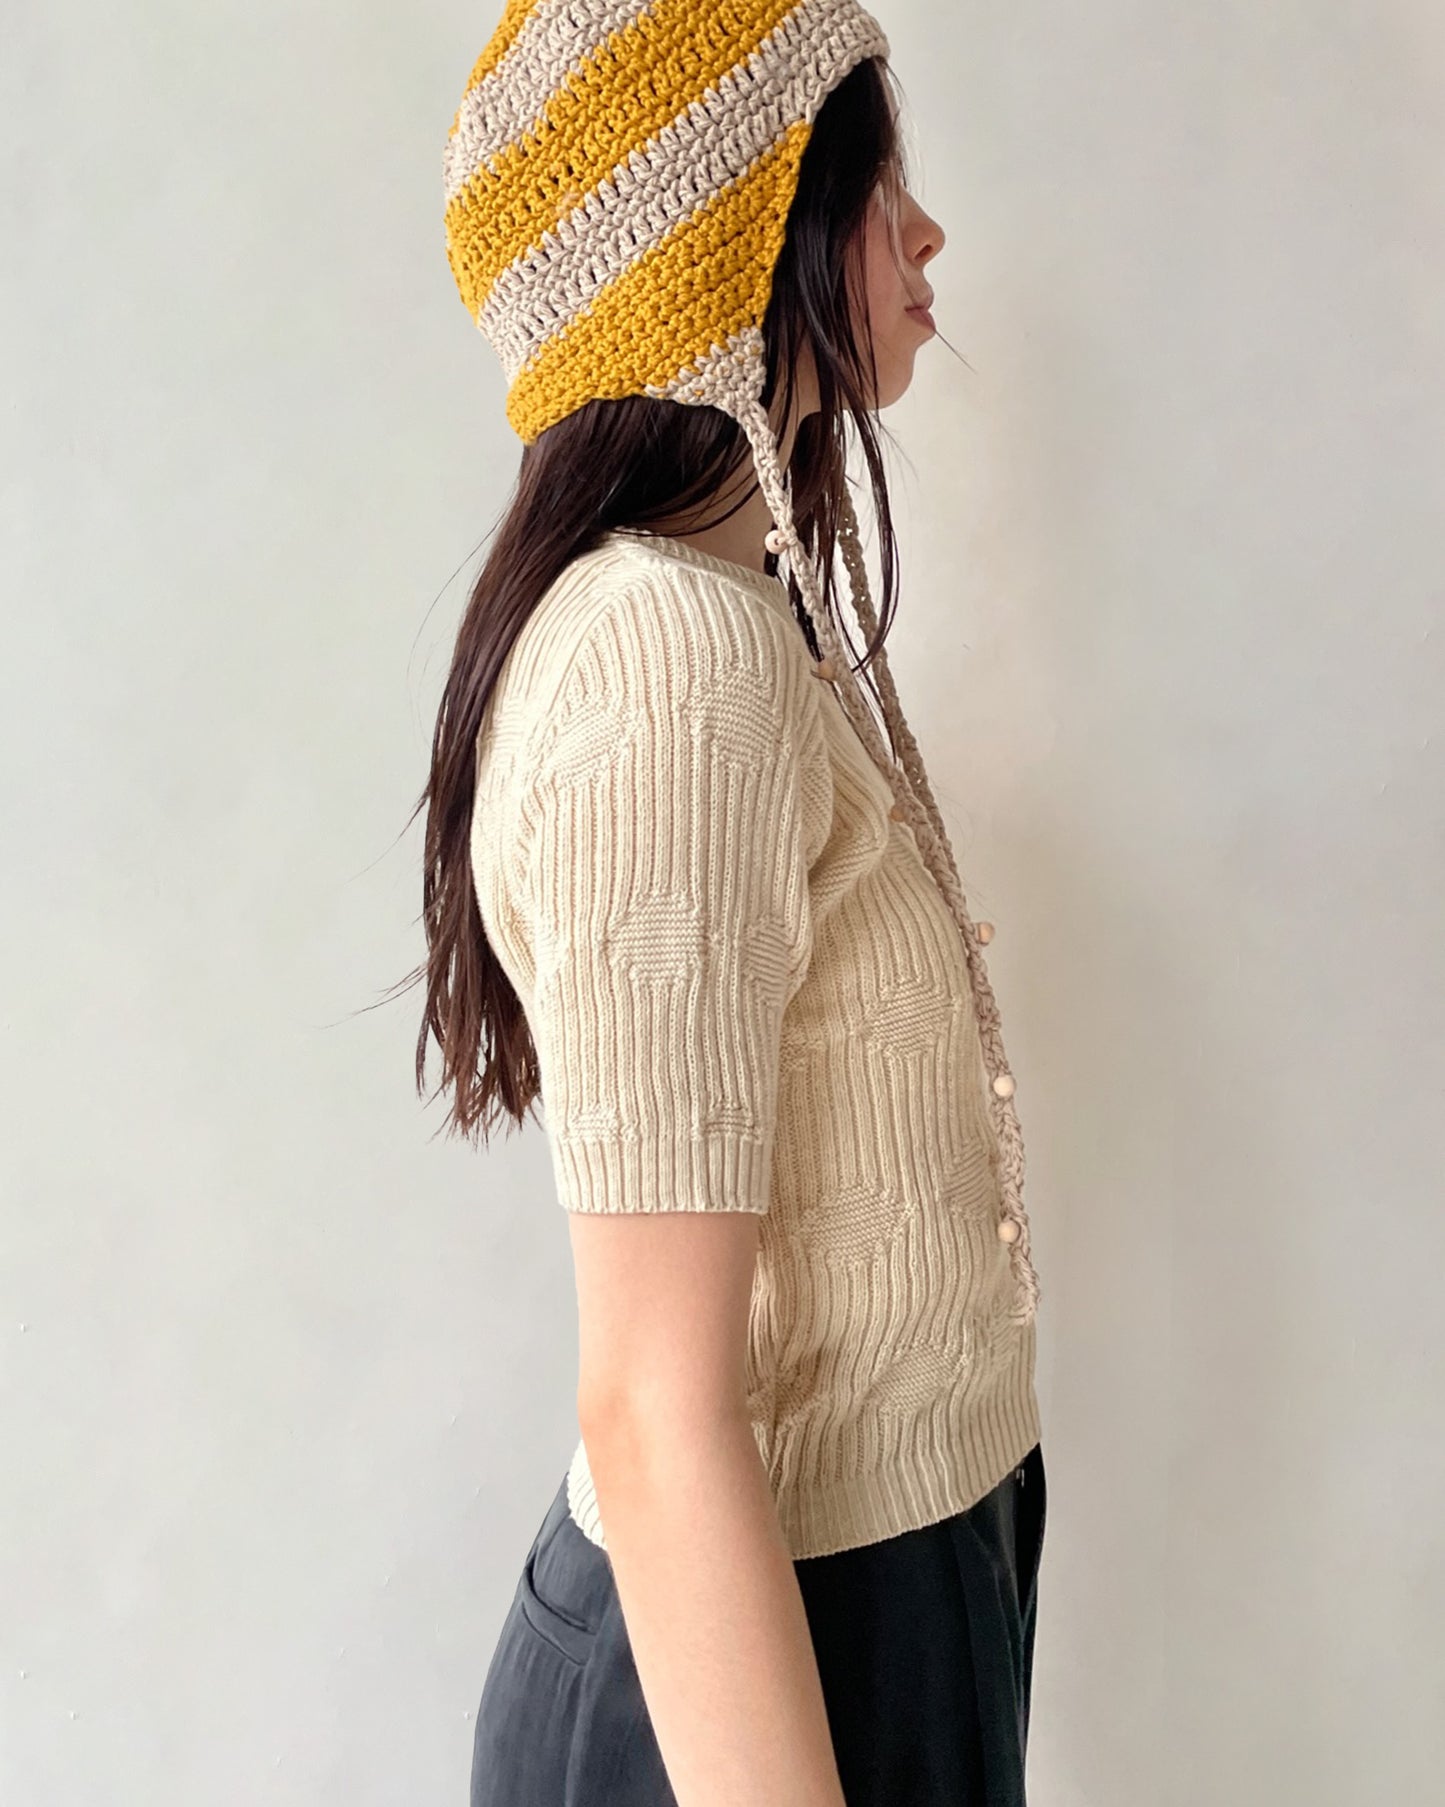 S/S Knit Top